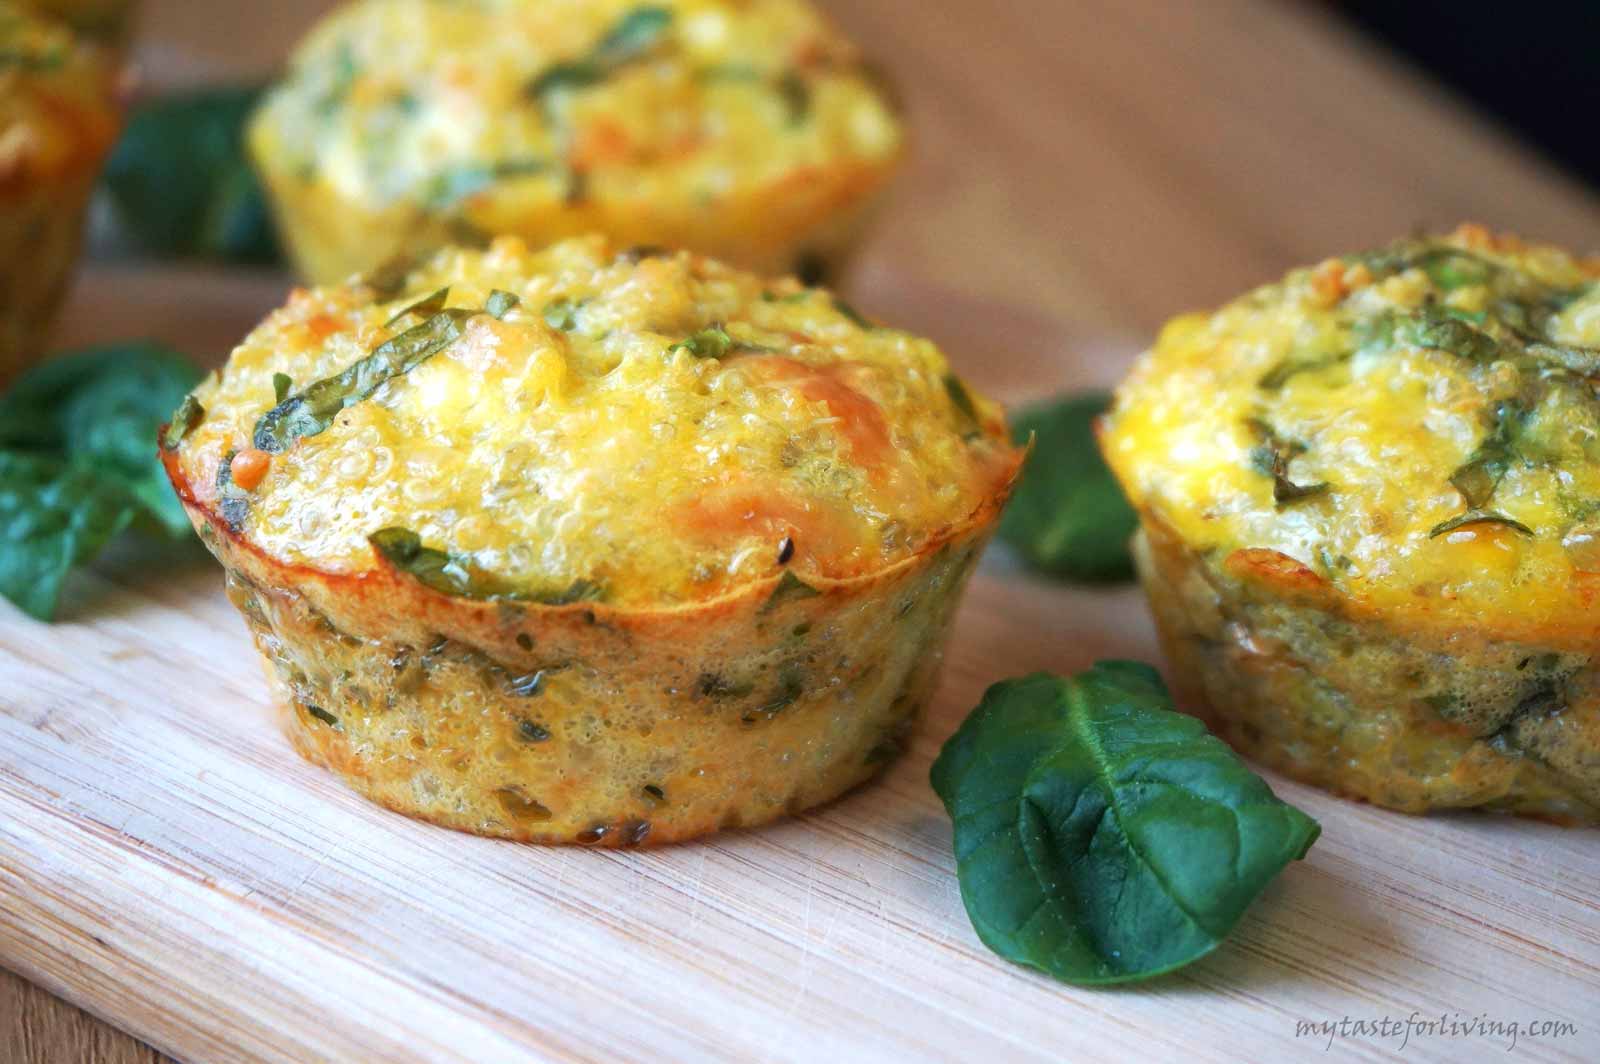 Delicious and healthy muffins made with quinoa, eggs, spinach, feta cheese and yellow cheese,  gluten-free . You can serve them hot or cold, they are suitable for morning or afternoon breakfast, as well as for lunch in a box.